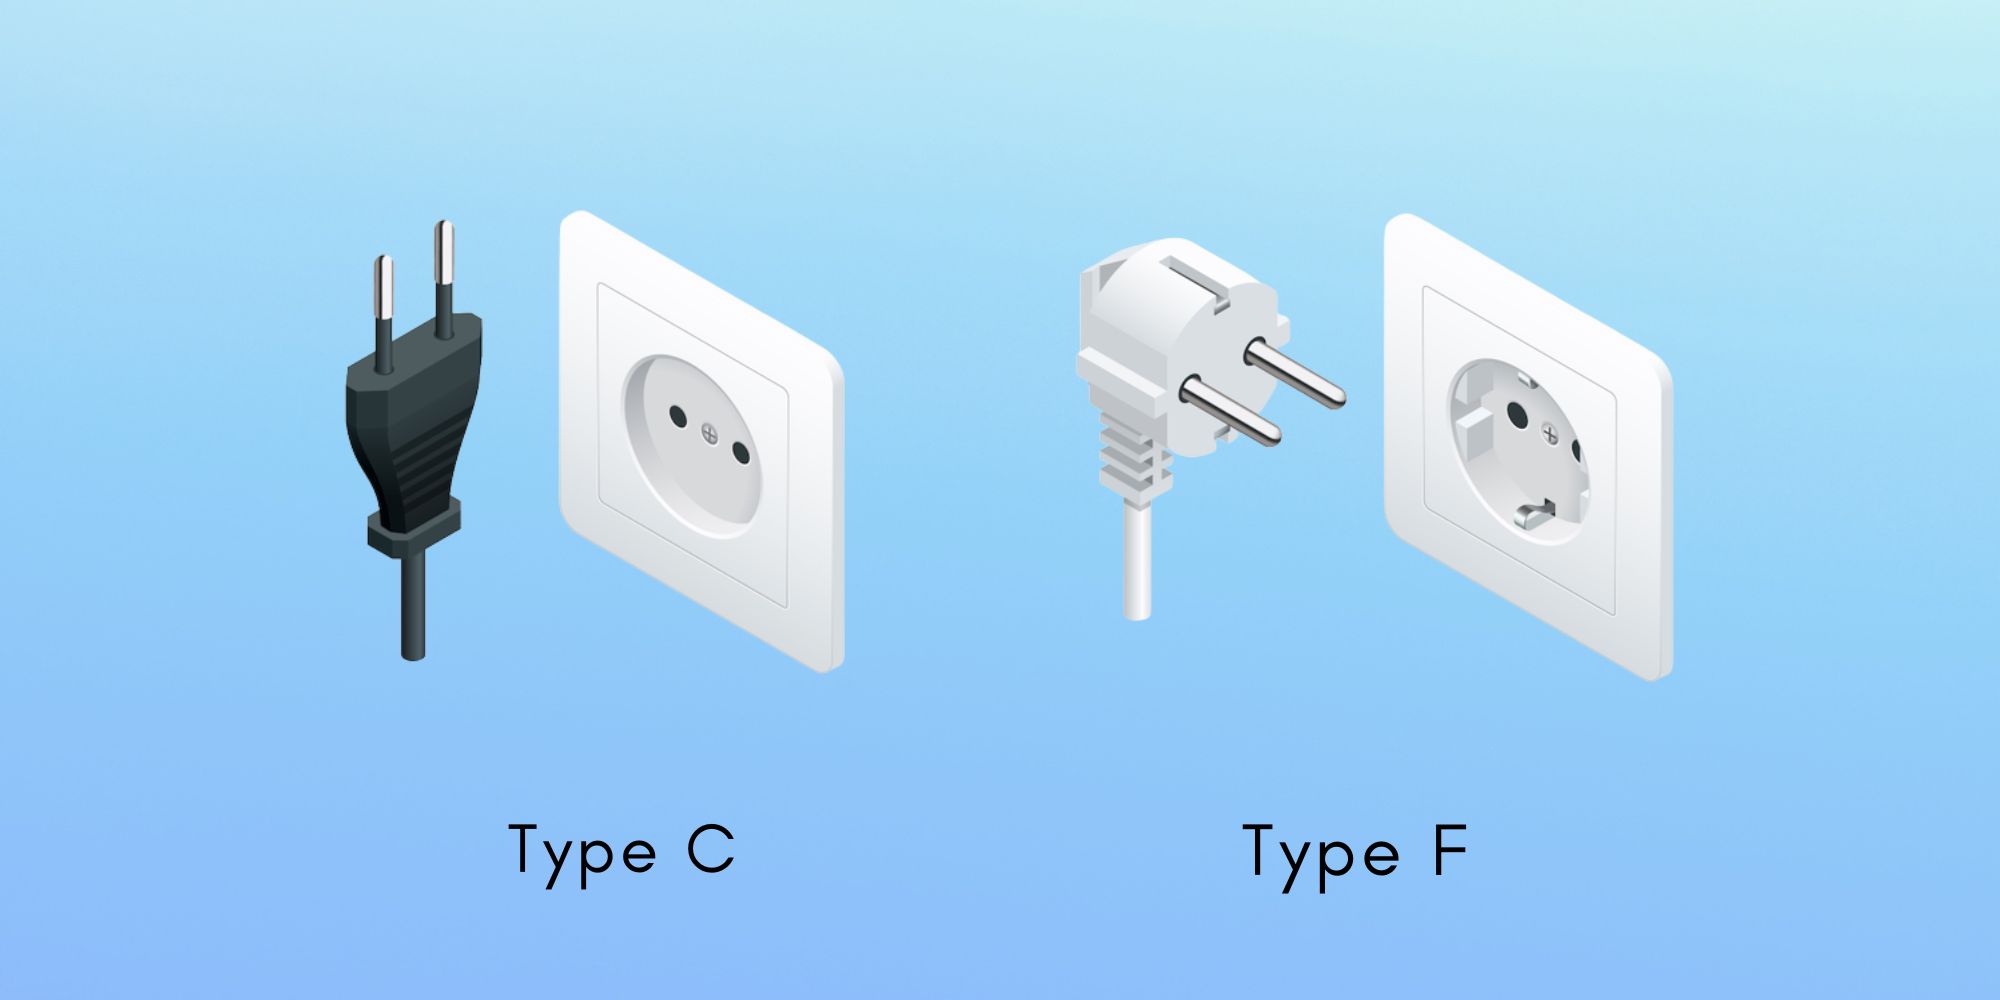 Serbia Power Plugs and Sockets: Type C and Type F
